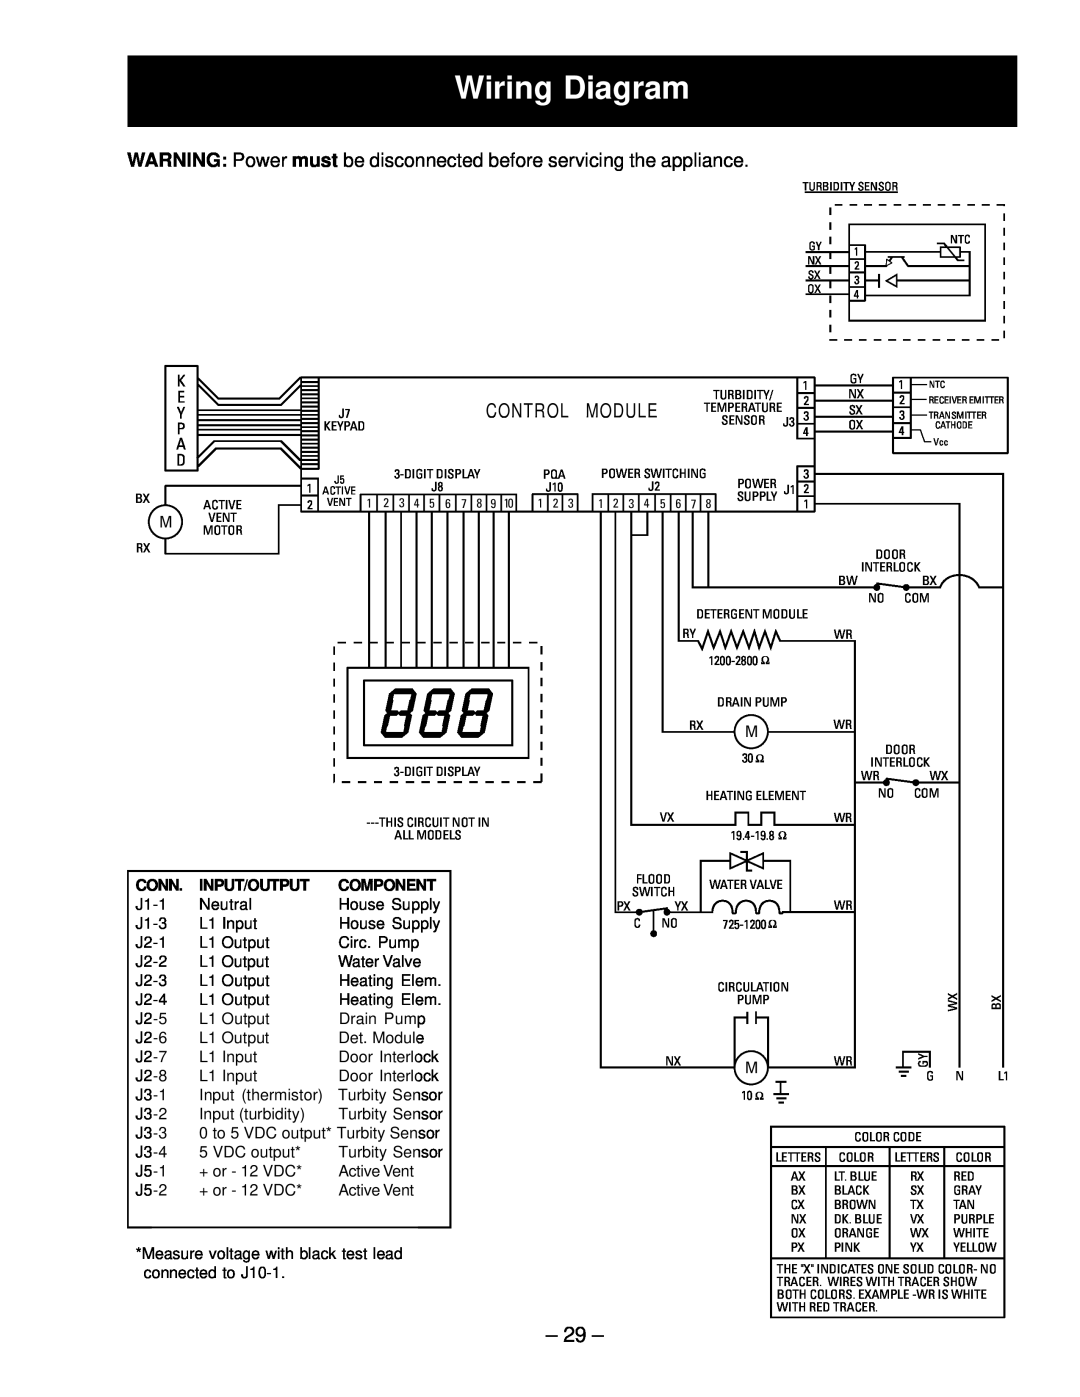 GE EDW4060, PDW7300, PDW7700, GSD6600, GSD6700, GSD6660, GSD6200, GSD6300 manual Wiring Diagram, 29, Conn, Input/Output, Component 